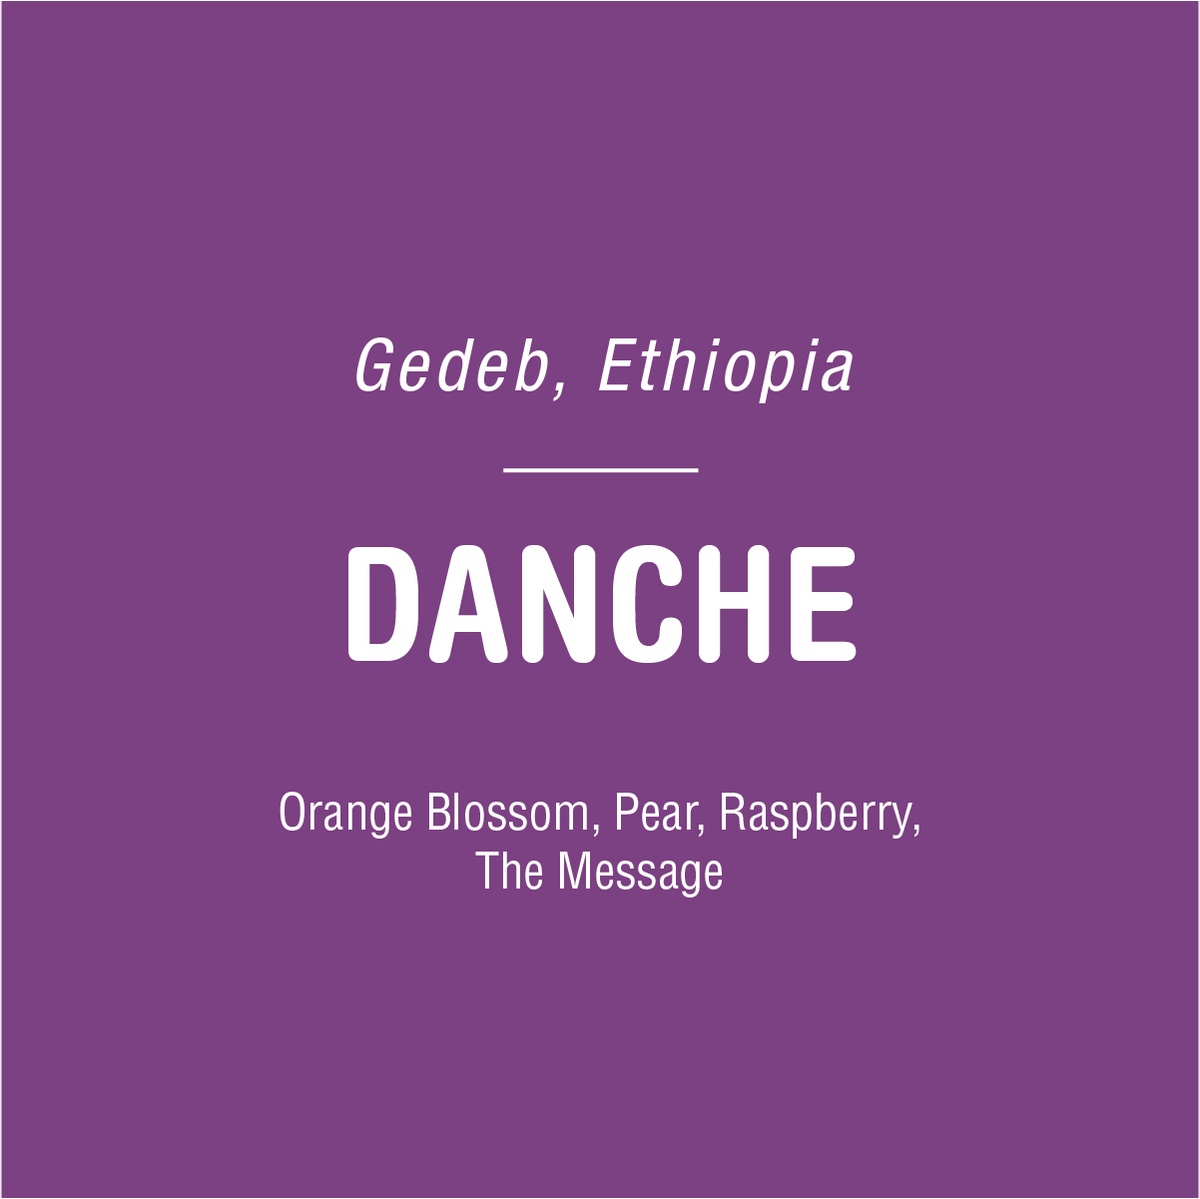 A graphic image with a purple background and white text which reads "Tandem Coffee Roasters Danche - Ethiopia - Worka Danche. orange blossom, pear, raspberry, the messac.